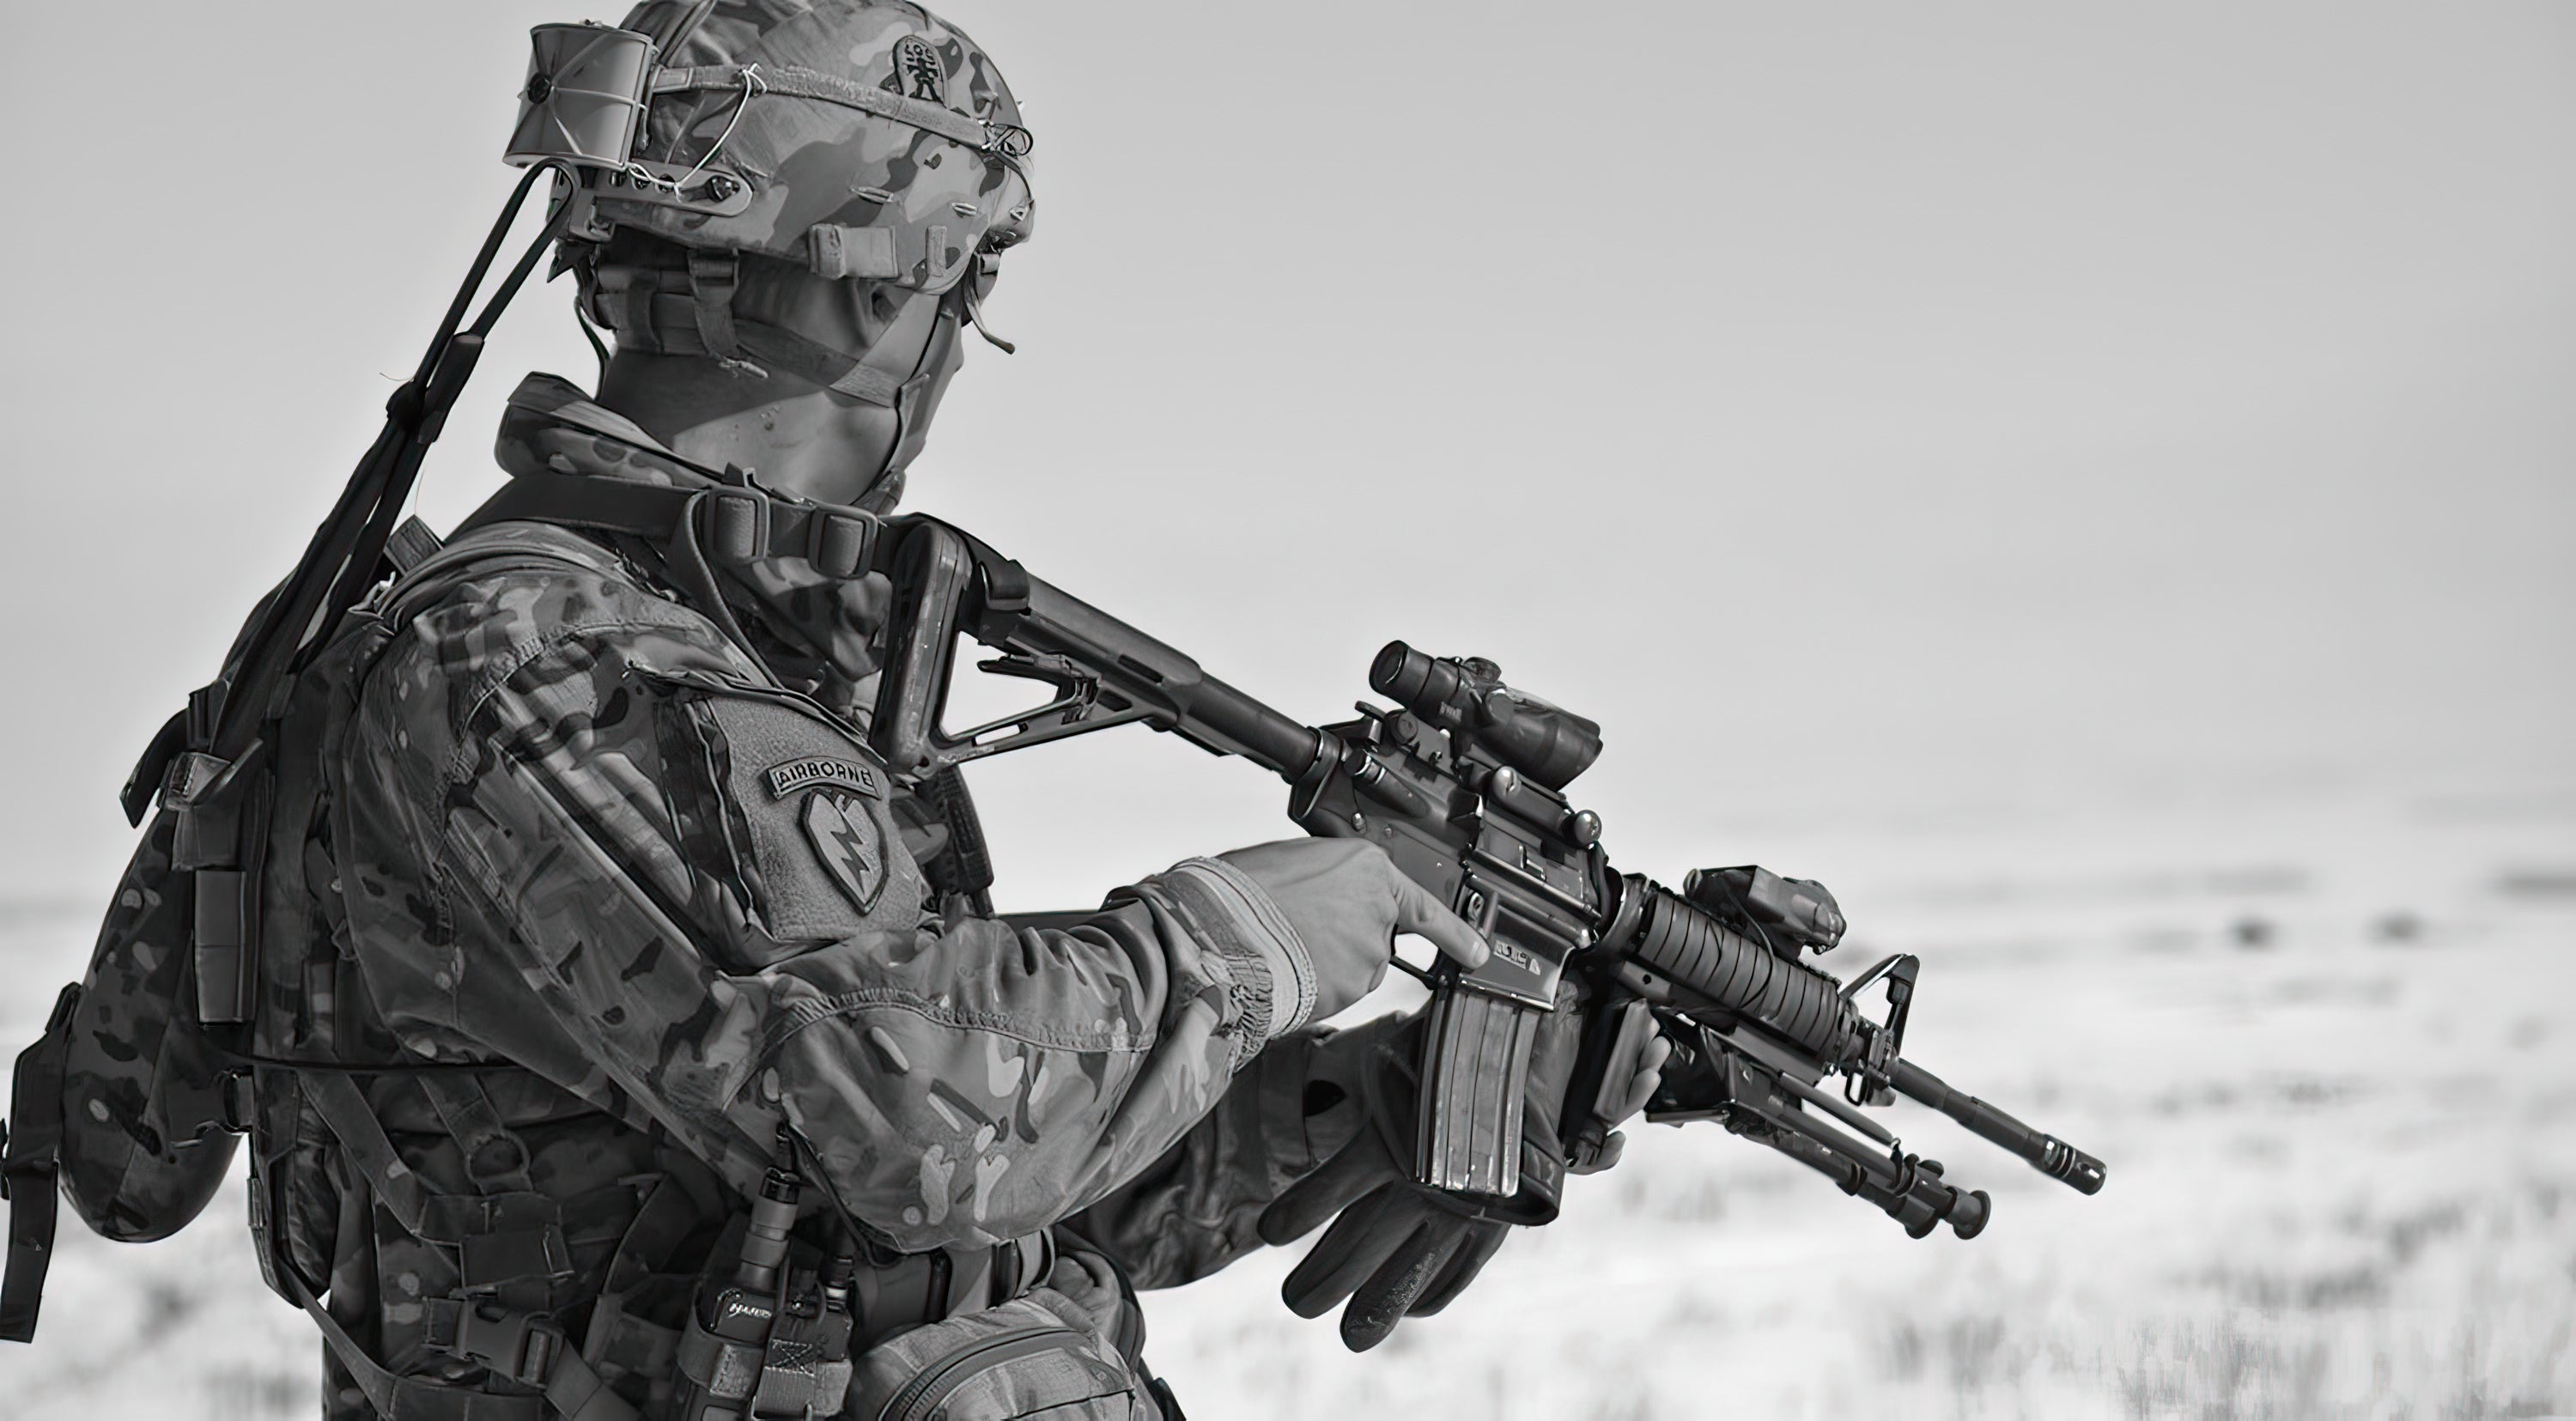 2022 Military Story Showcase - Image of airborne ranger with firearm